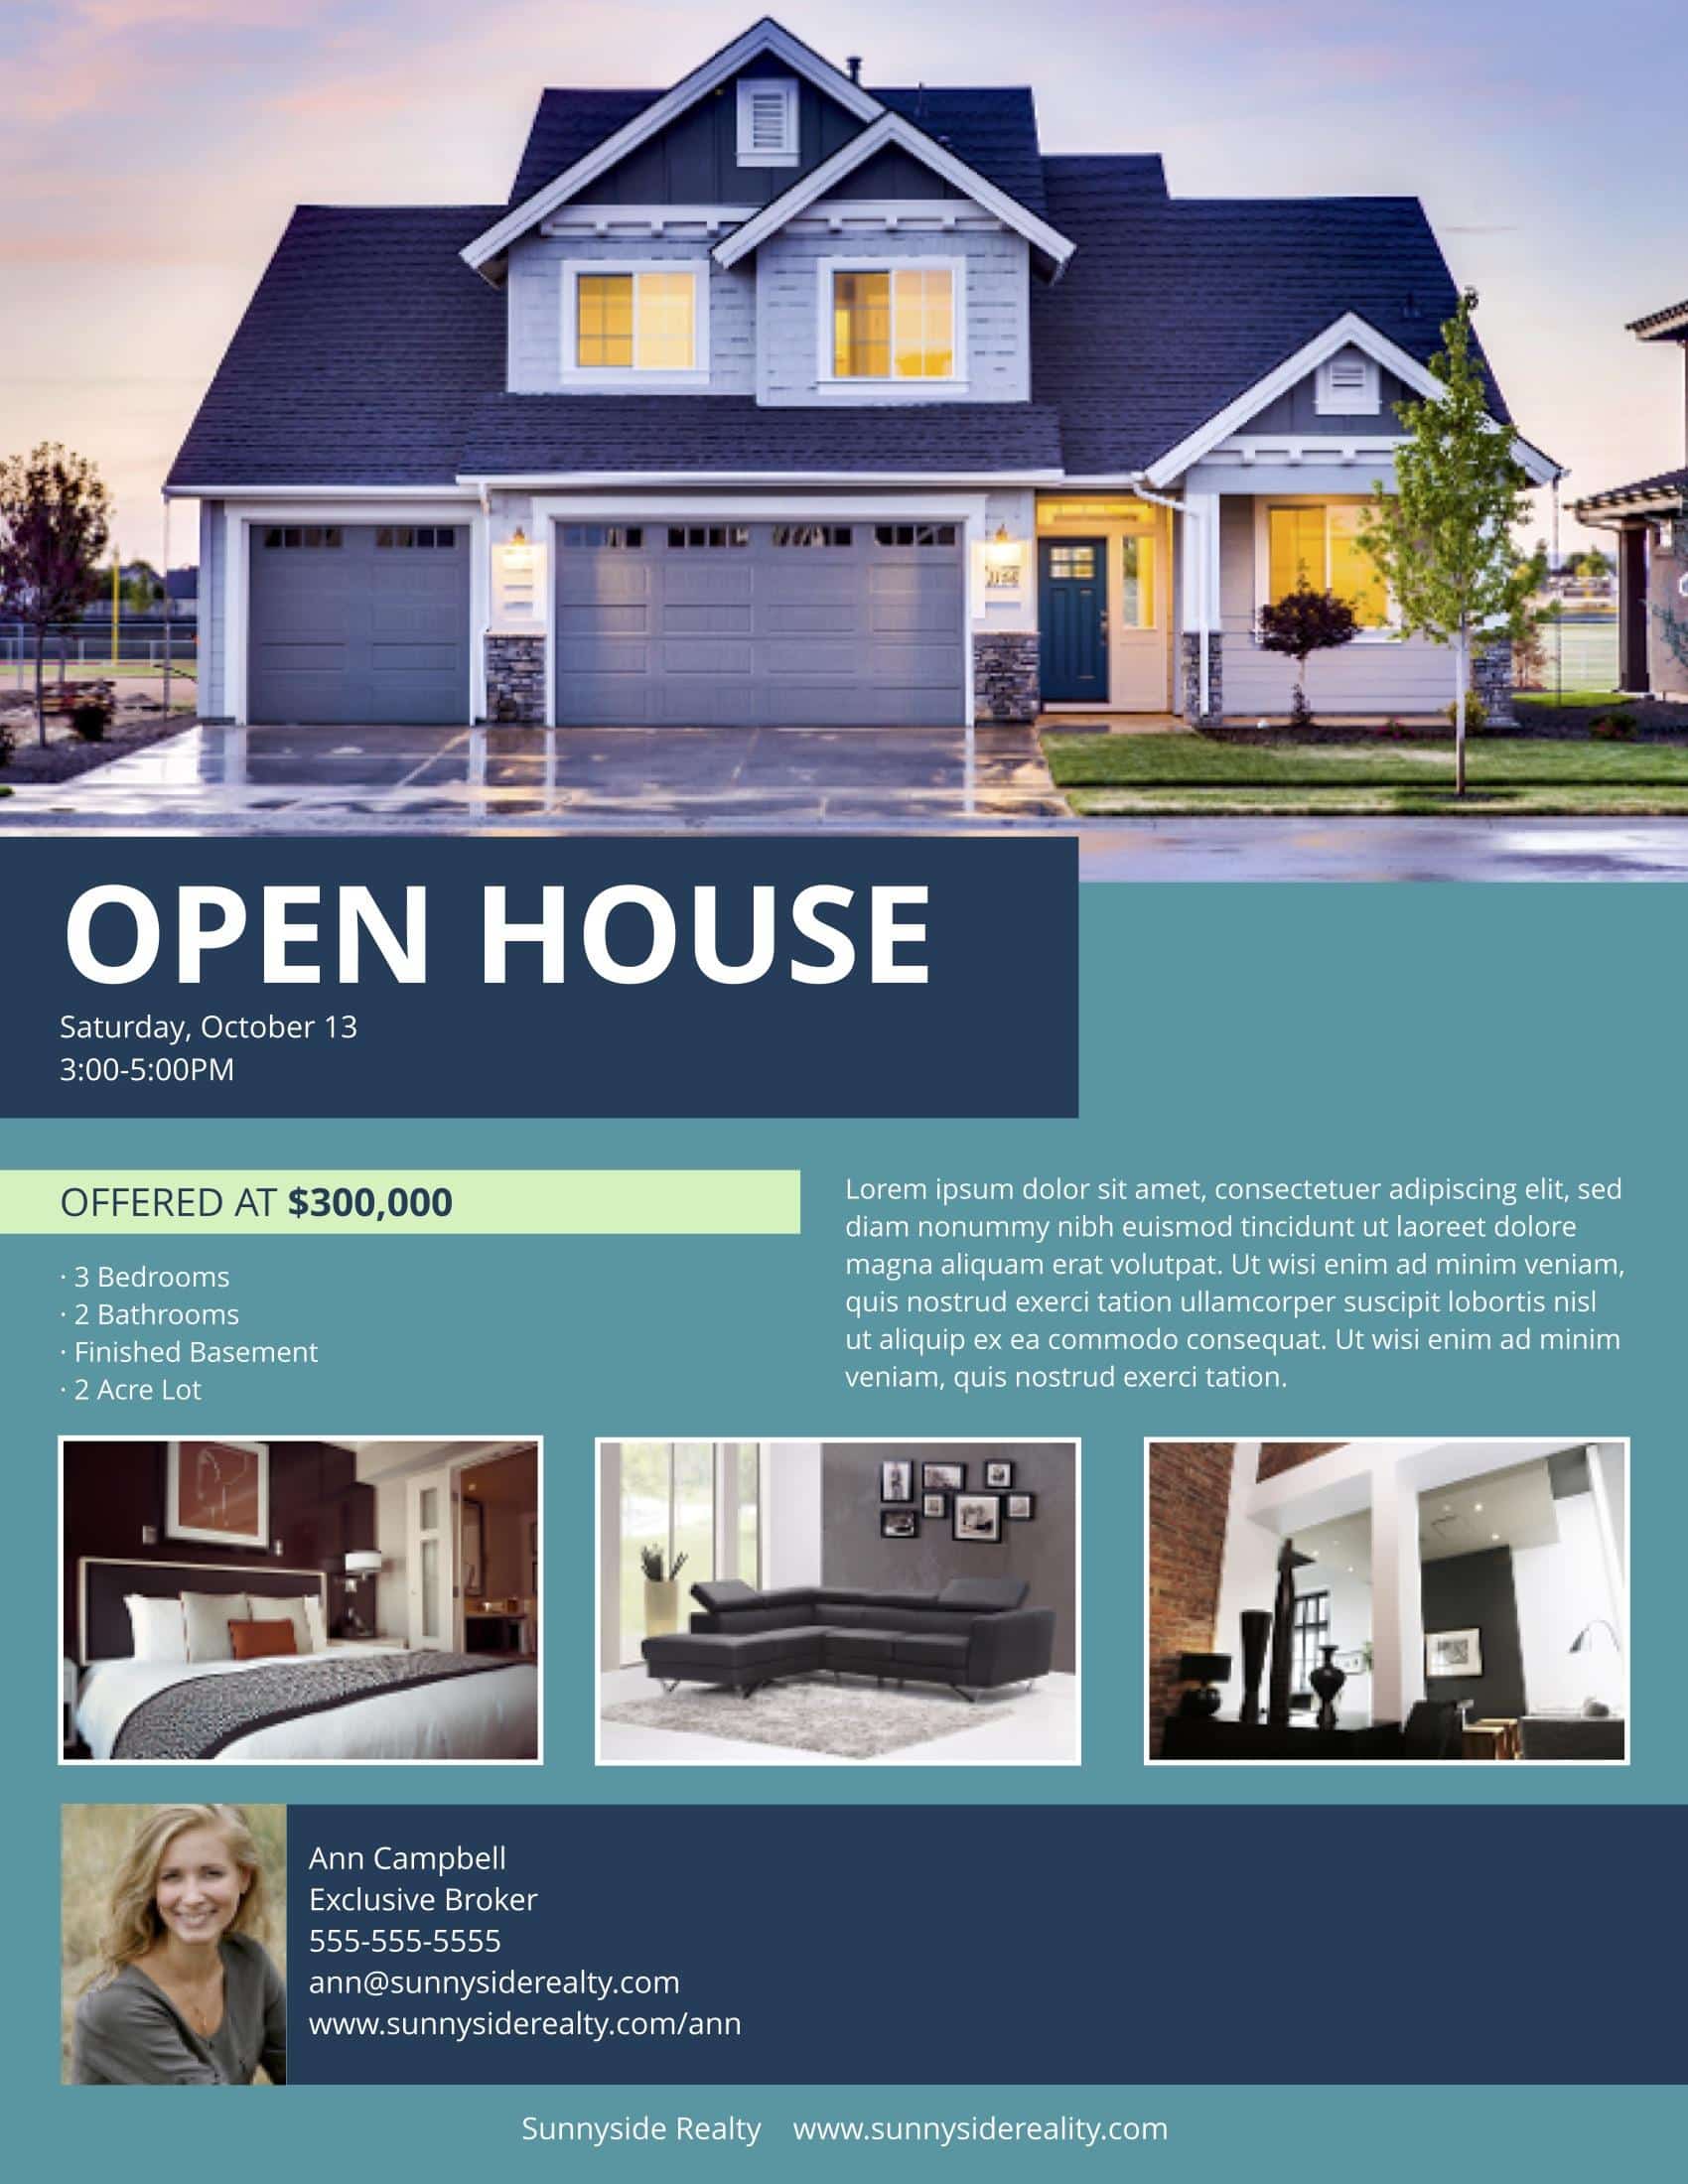 17 Real Estate Flyer Templates You Can